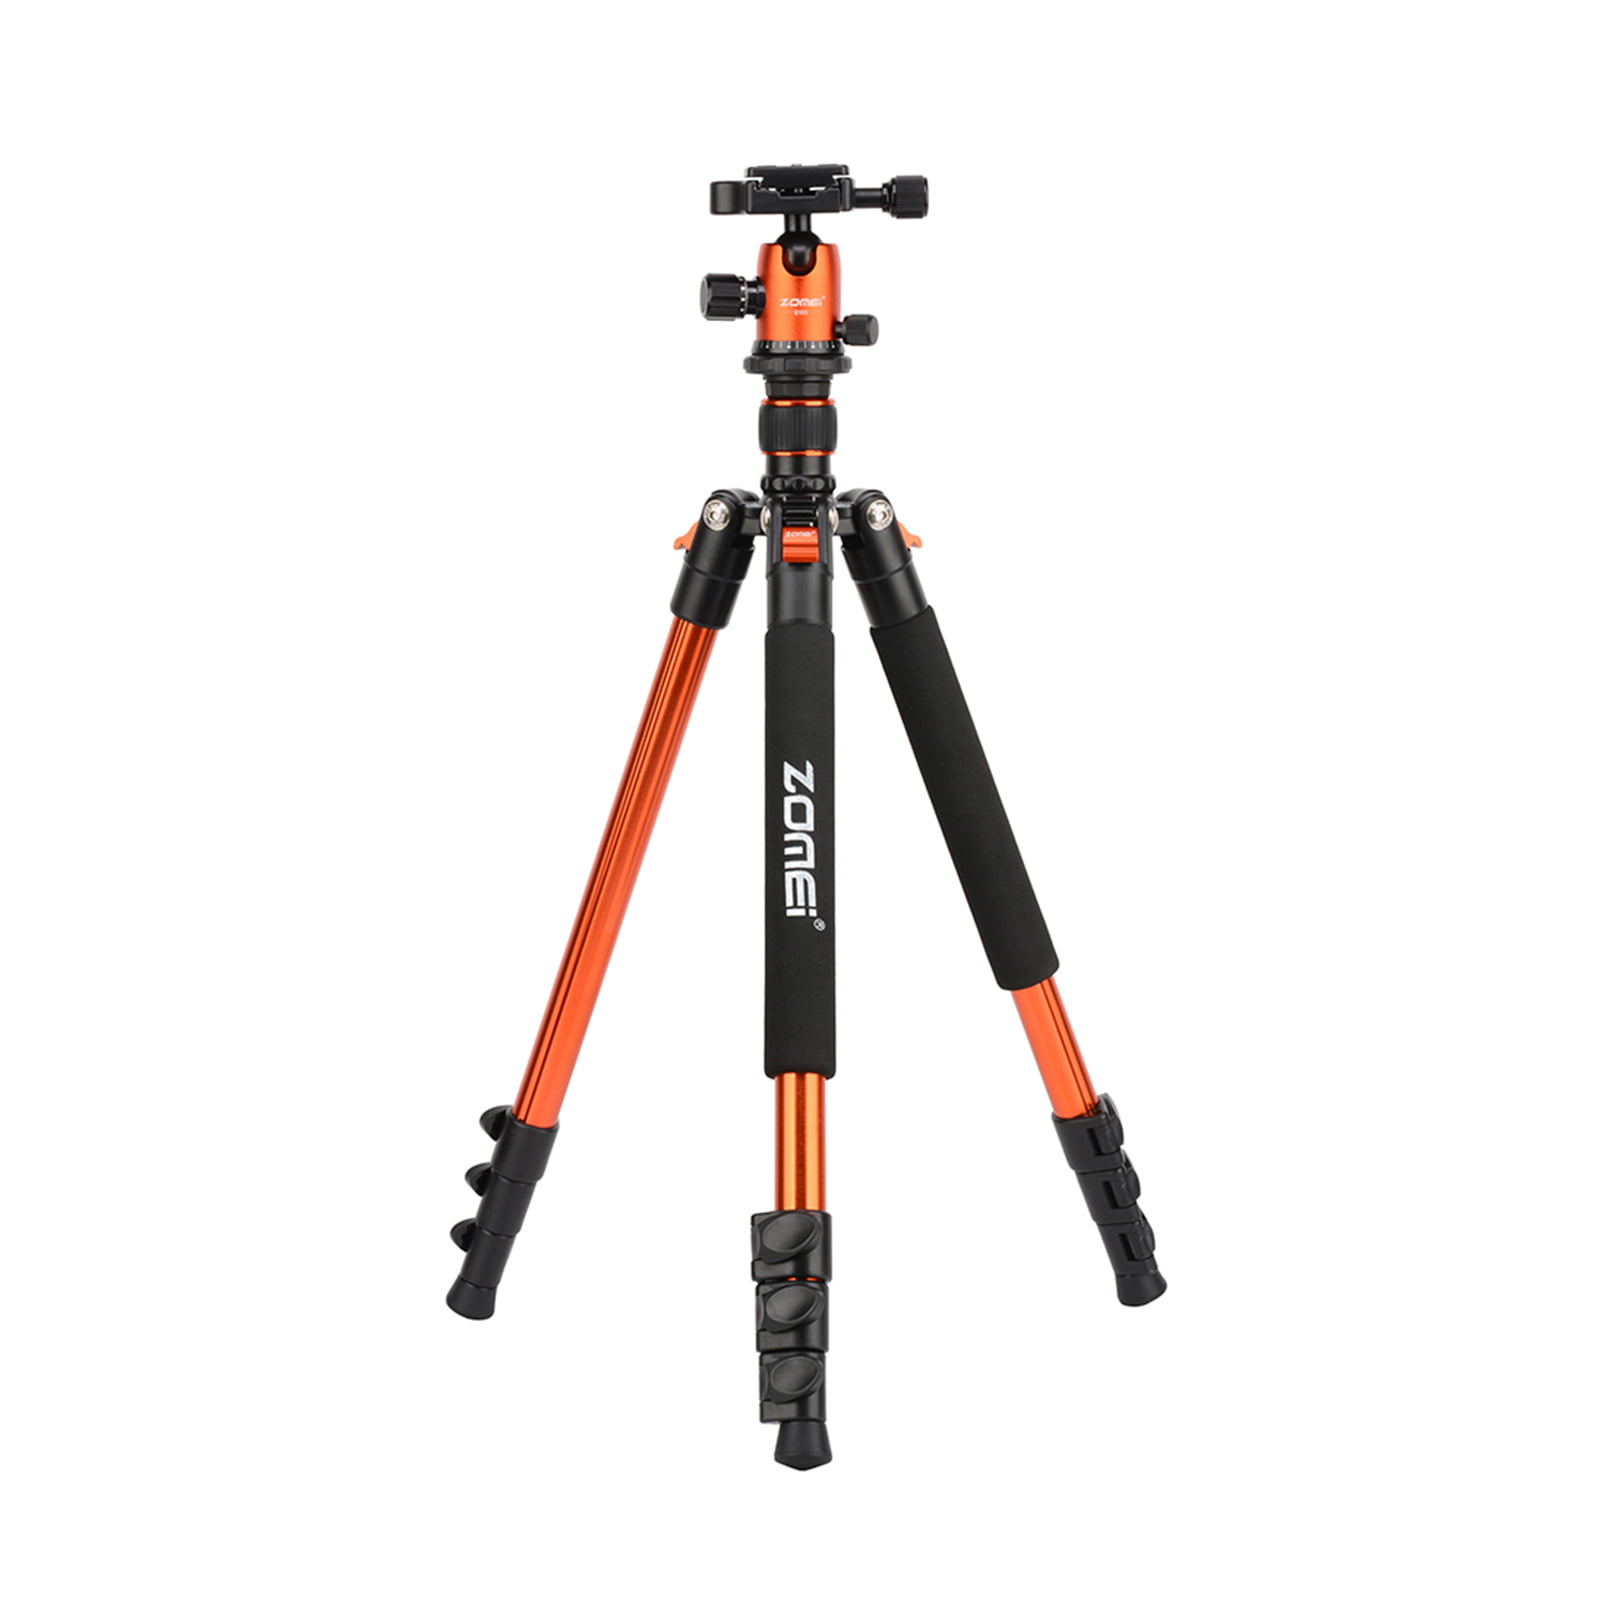 RuleaxA ZOMEI Q555 63 Inch Lightweight Aluminum Alloy Travel Portable Camera Tripod with Ball Head/Quick Release Plate/Carry Bag for Canon Nikon Sony DSLR ILDC Cameras